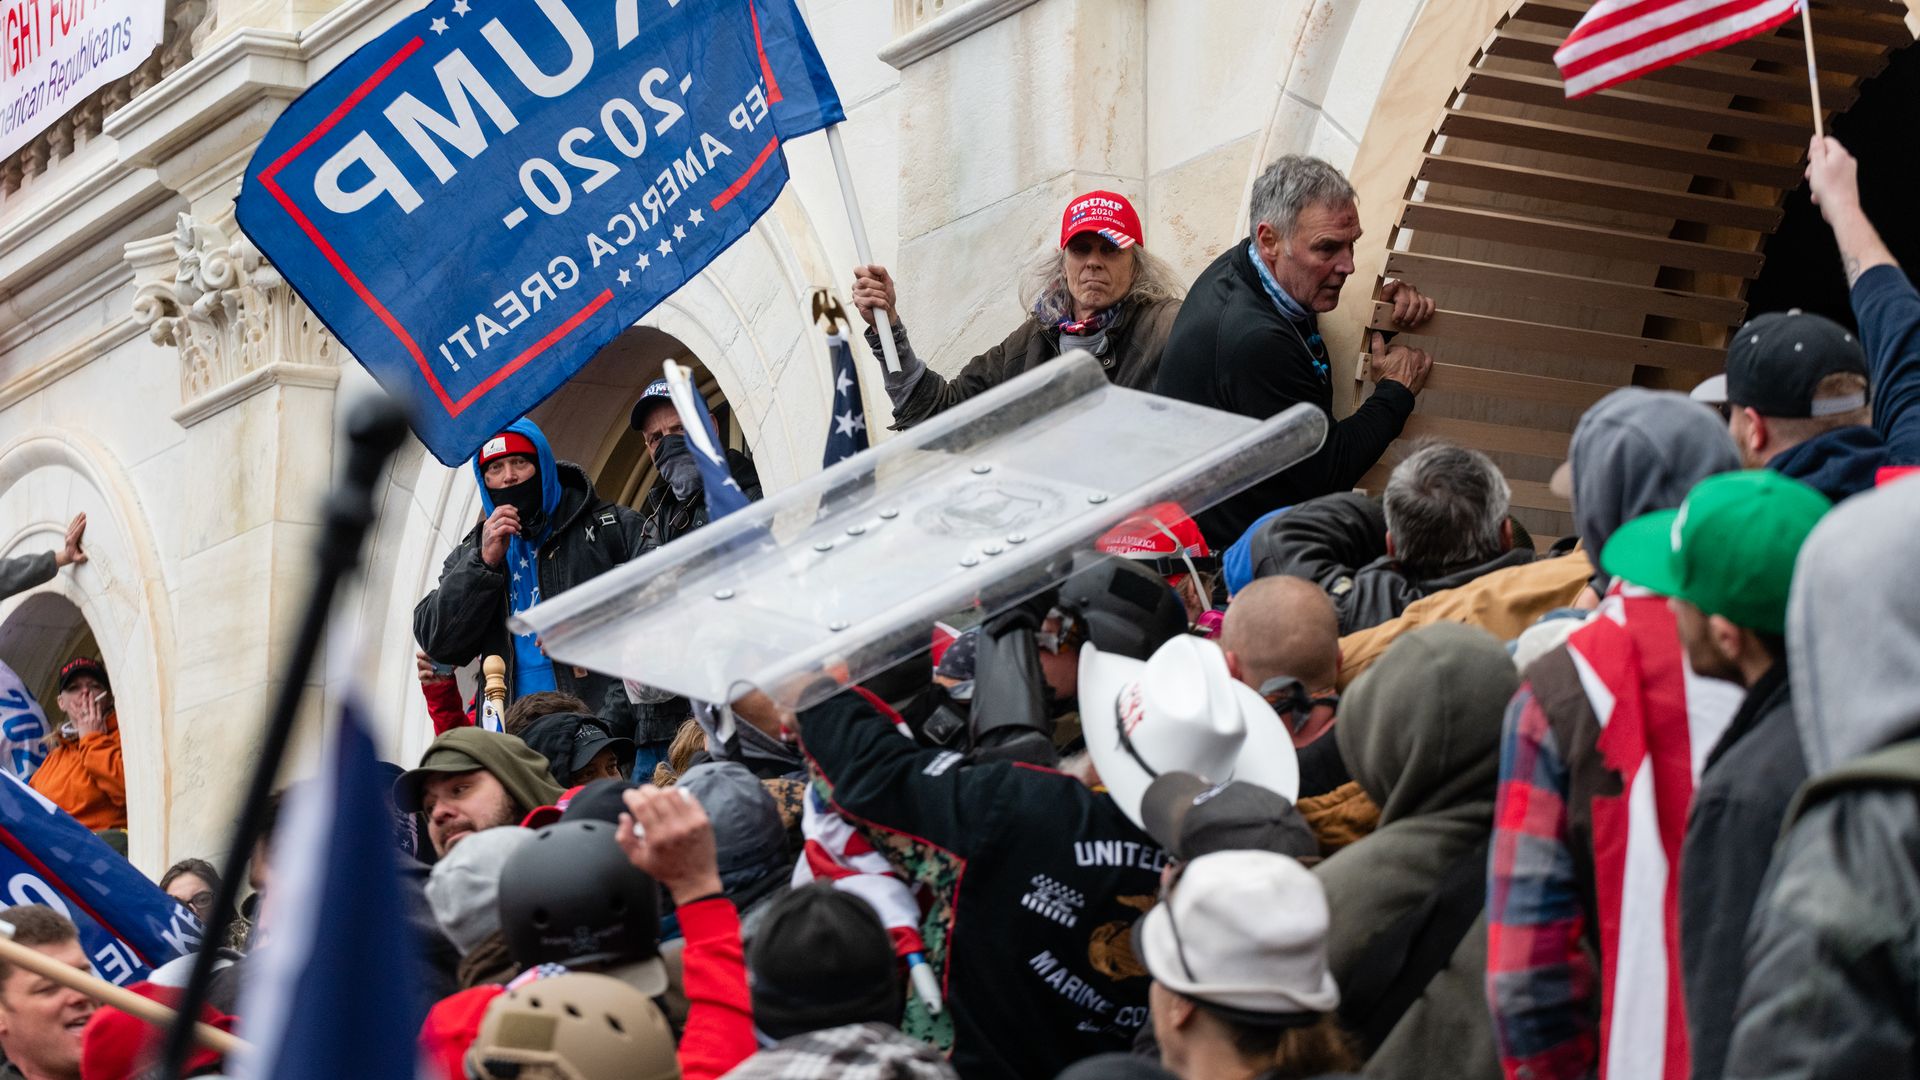 Rioters attempting to breach the U.S. Capitol building on Jan. 6, 2021.